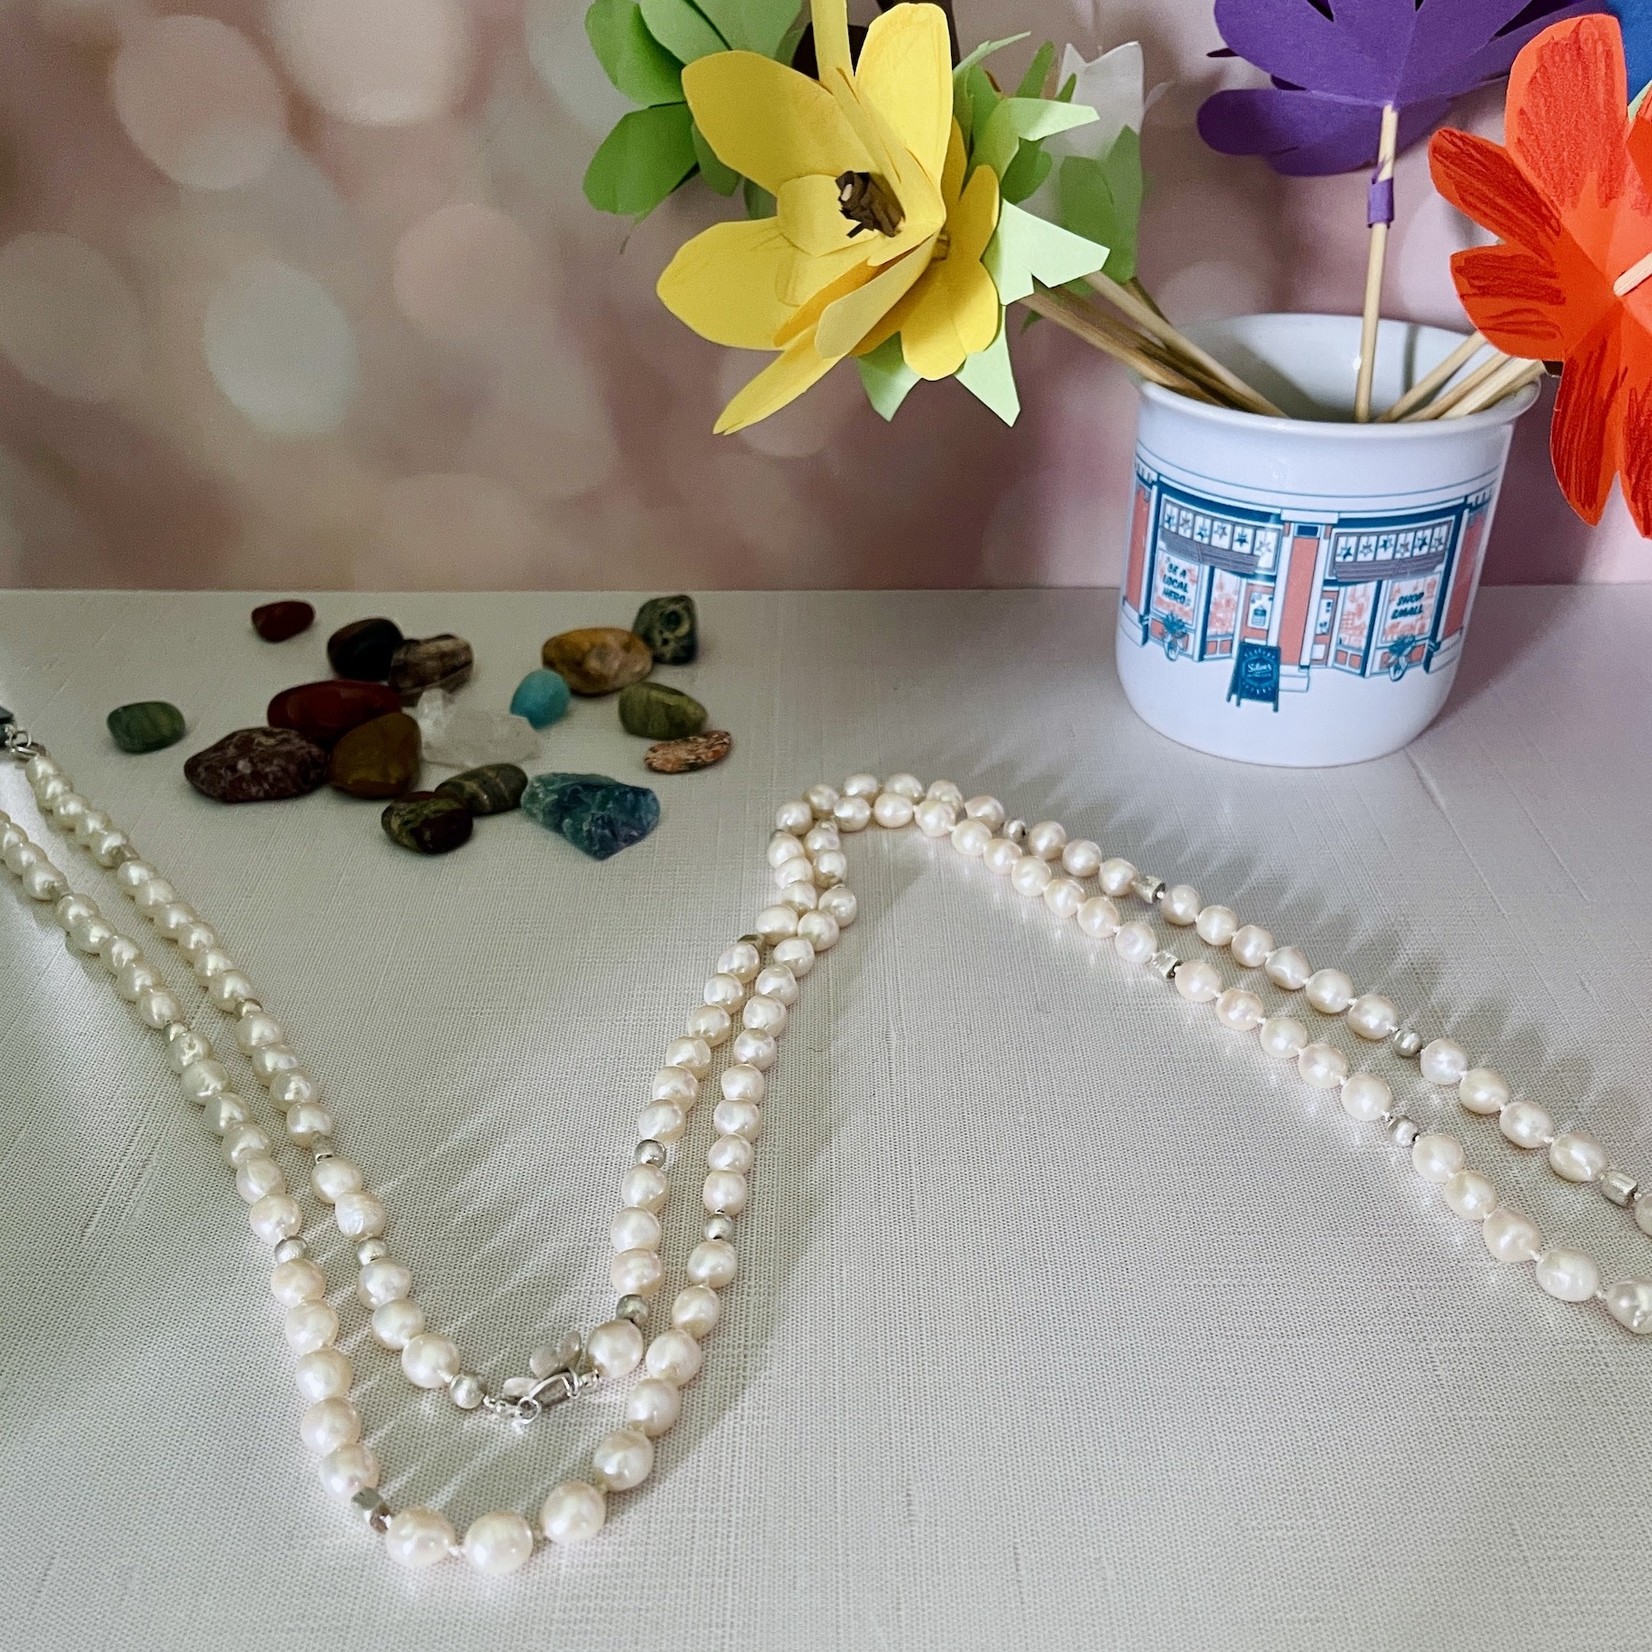 Handmade Necklace with White Pearls